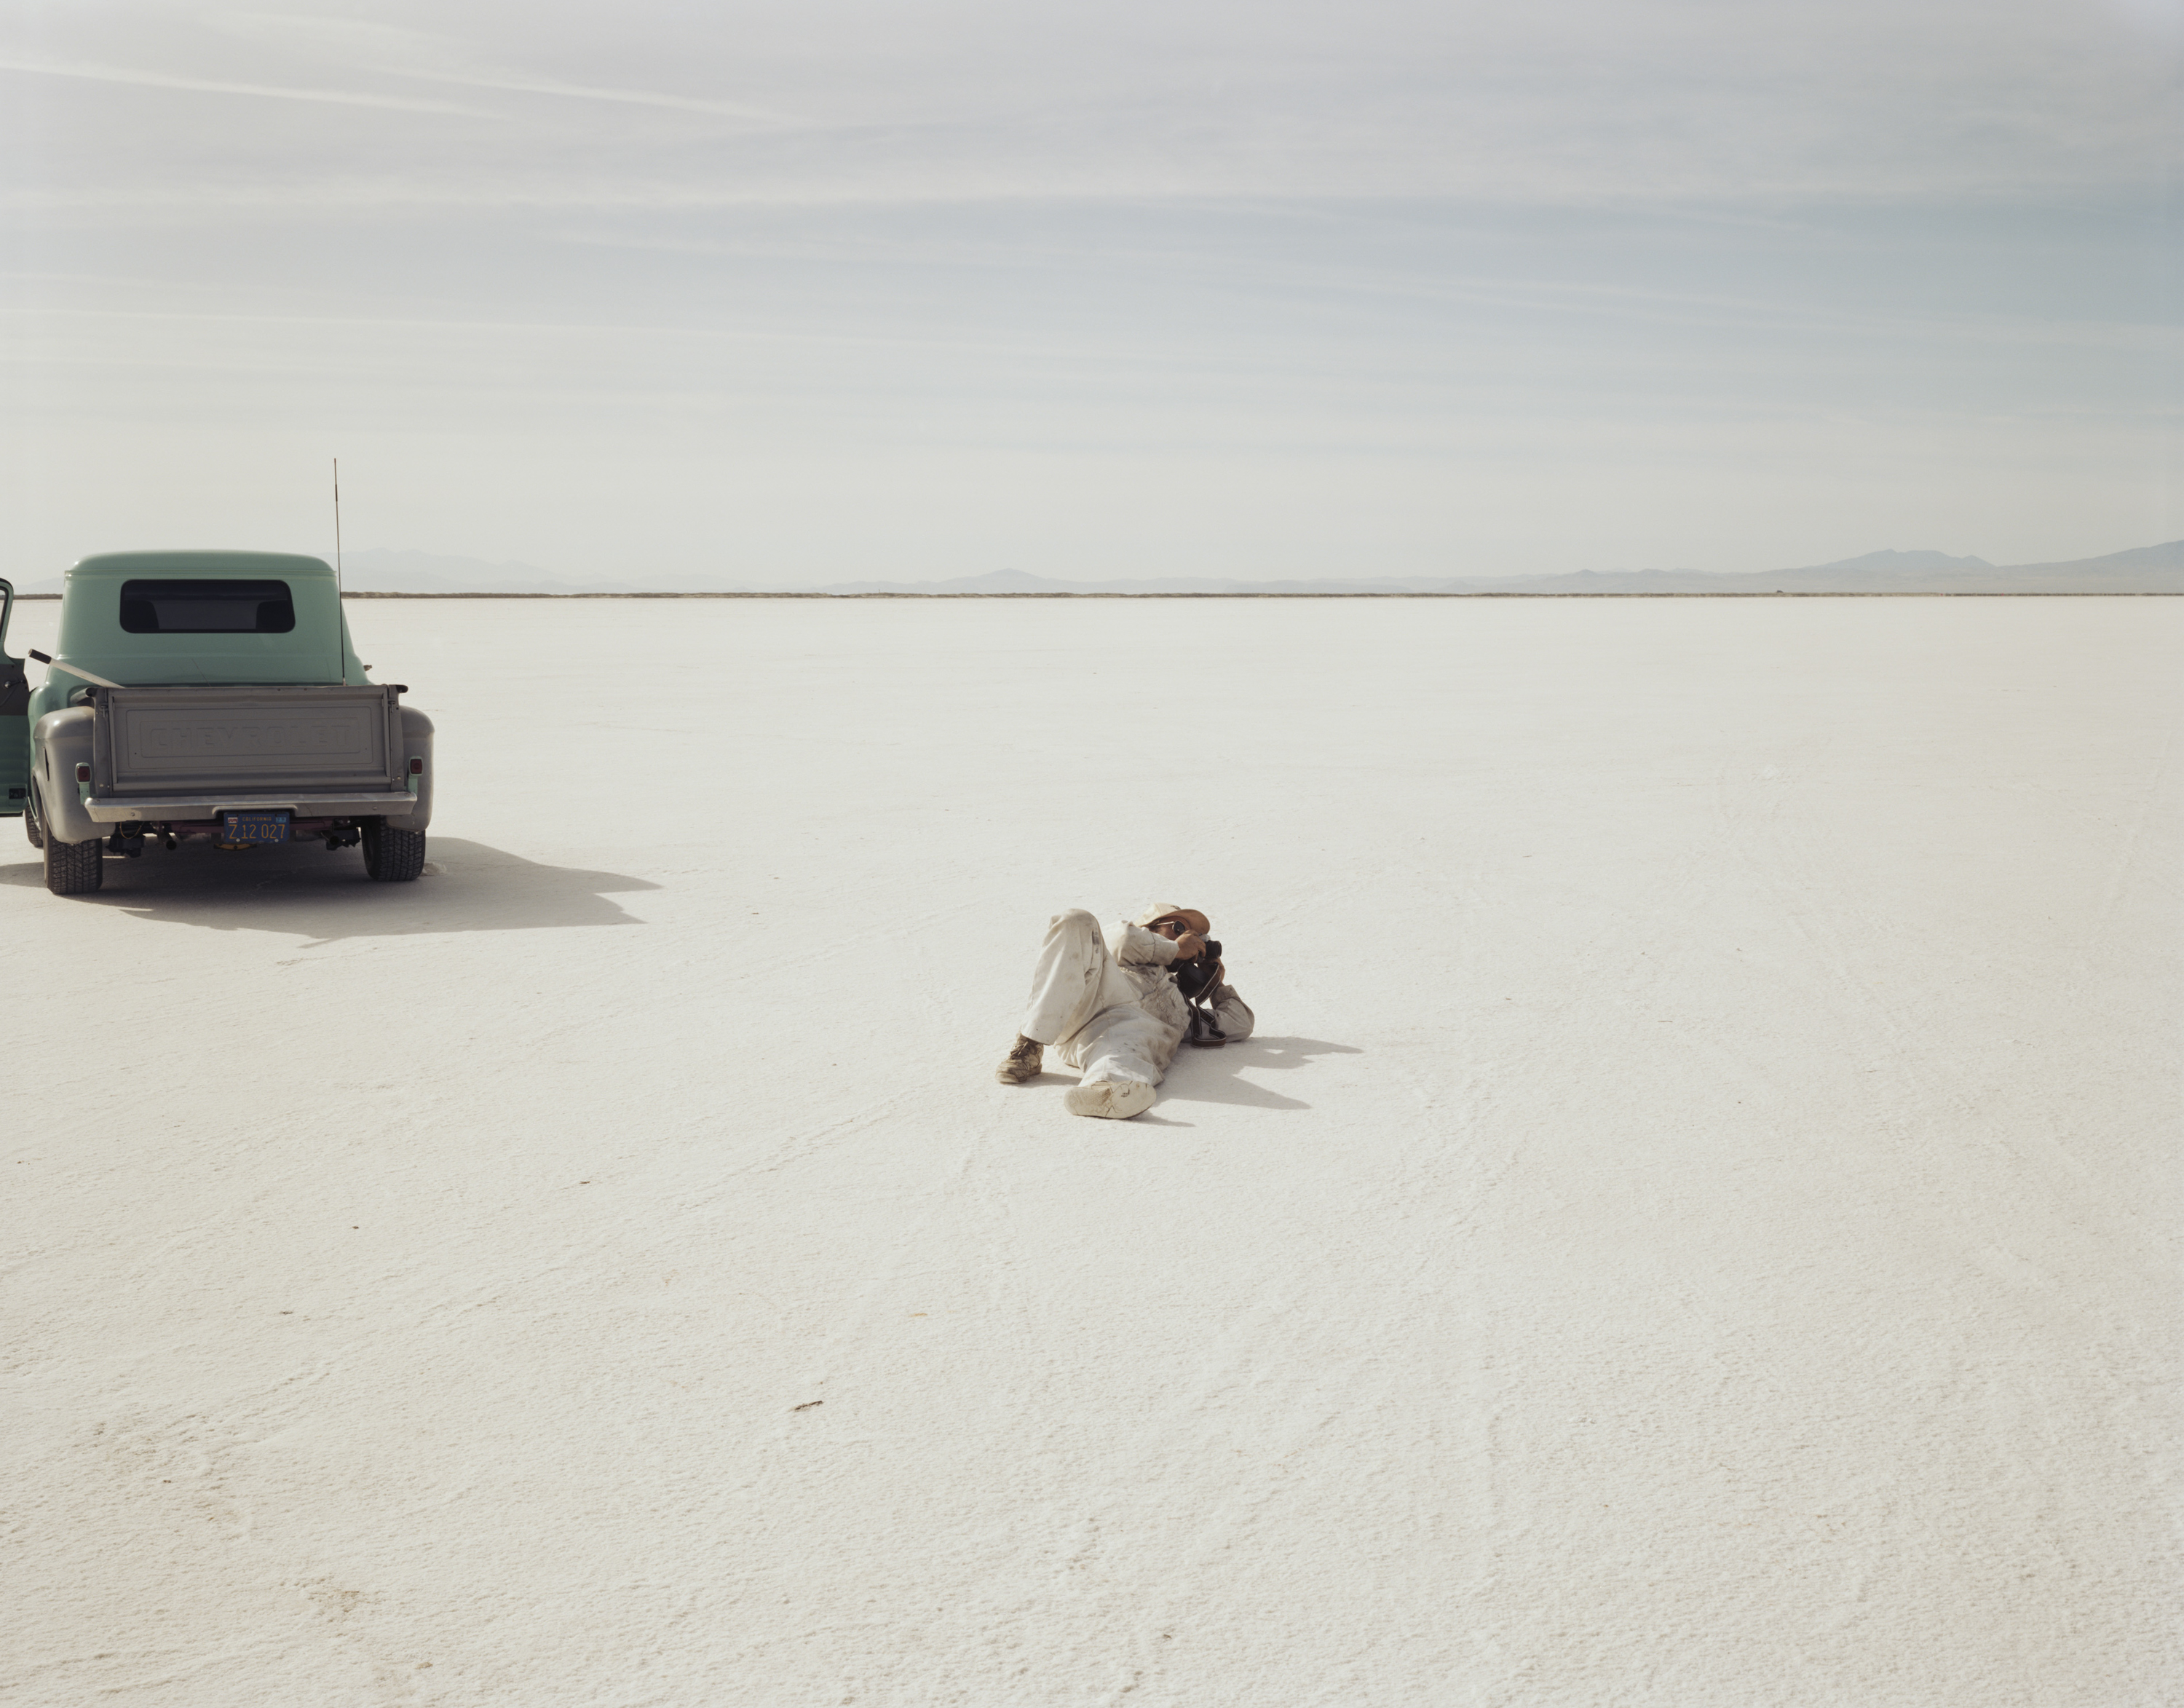 Color photograph of figure laying on the desert ground using a camera near a pickup truck